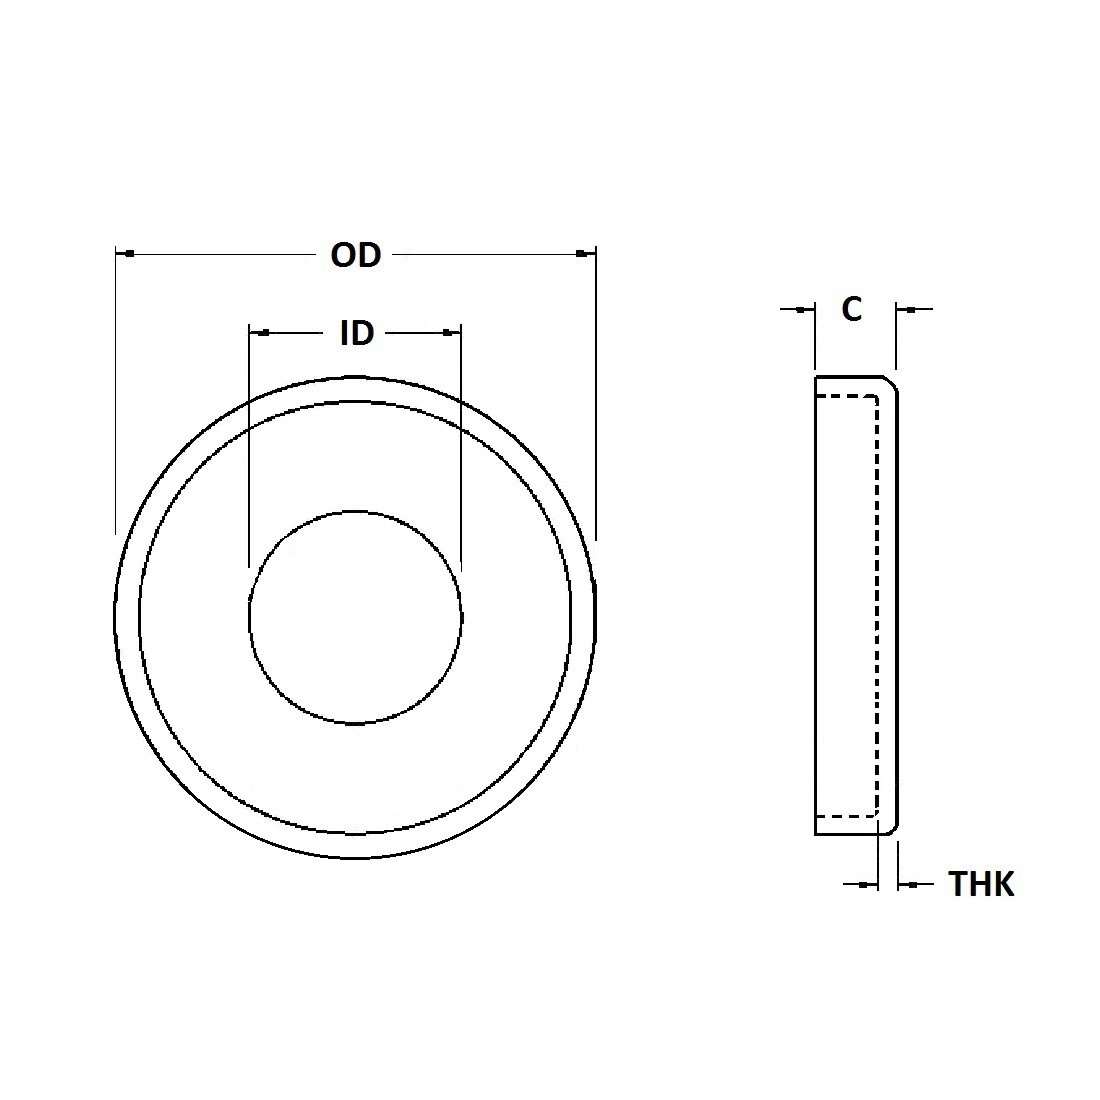 Cup Washer - 0.195 ID, 2.312 OD, 0.055 Thick, Aluminum